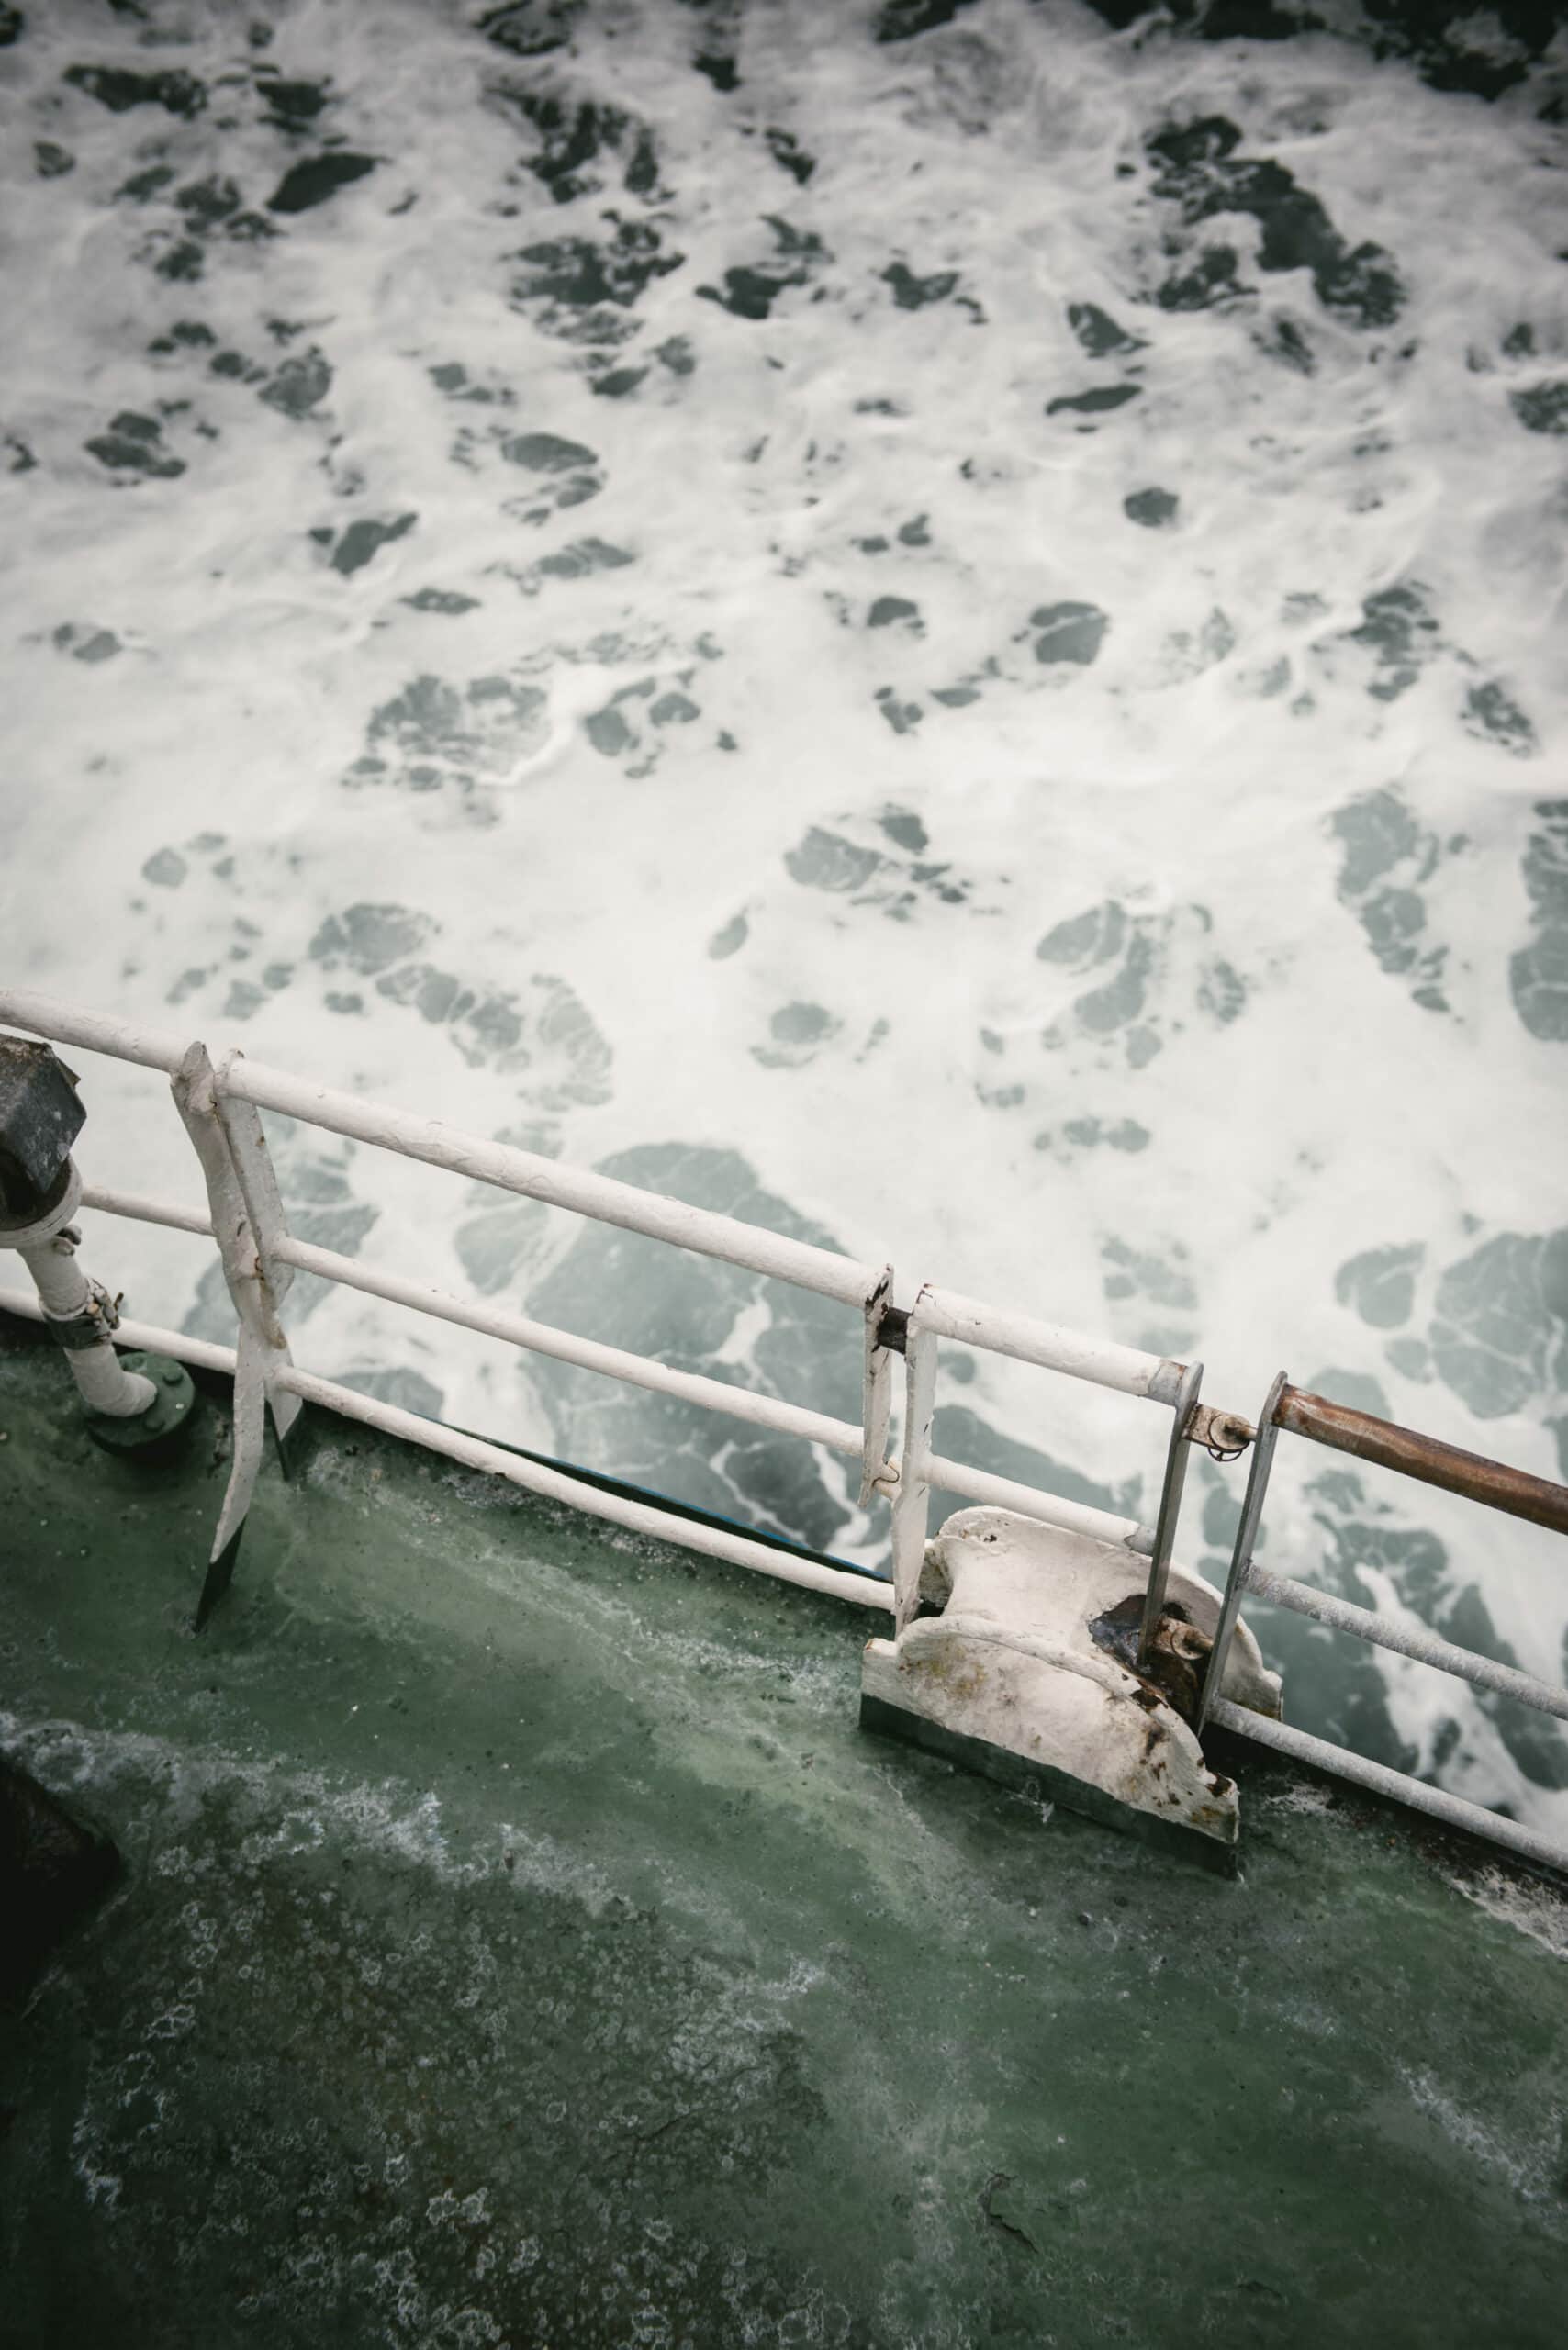 Aboard the ferry, their love writes a story spanning landscapes, as they journey from the untamed Westfjords to Snaefelseness' coastal embrace.